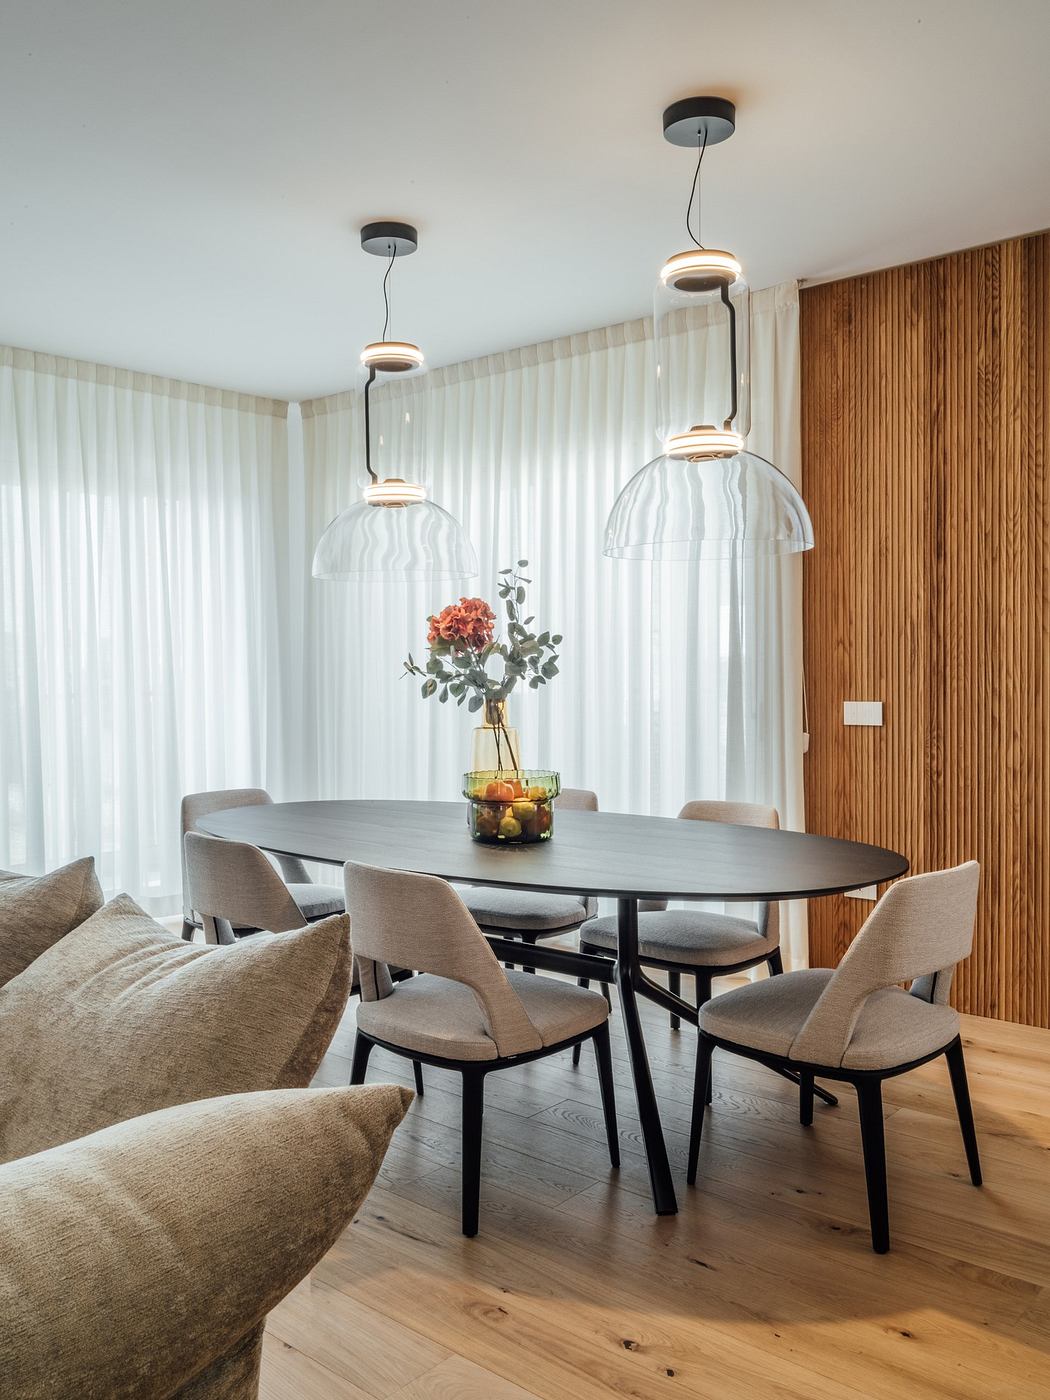 Modern dining room with wooden paneling and elegant pendant lights.